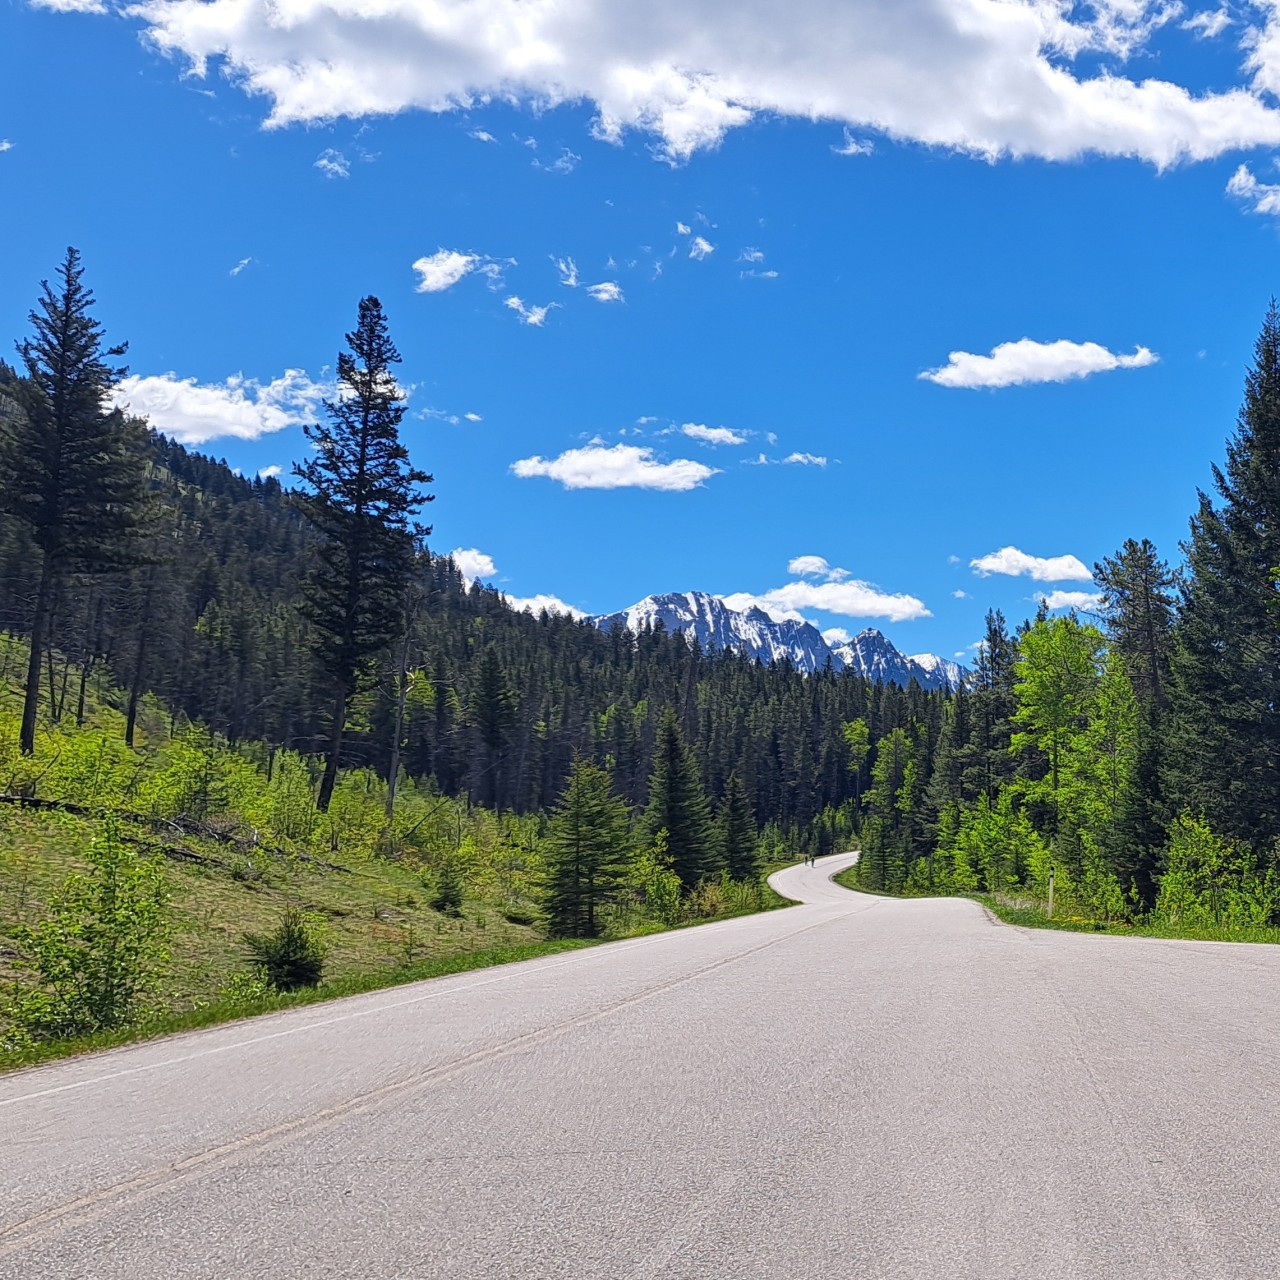 Cycling in Banff National Park Canada - Next to being in the Canadian Rocky Mountains, the best part of riding the Bow Valley Parkway is the wide-open roads. Could there be a better sight for a road cyclist?